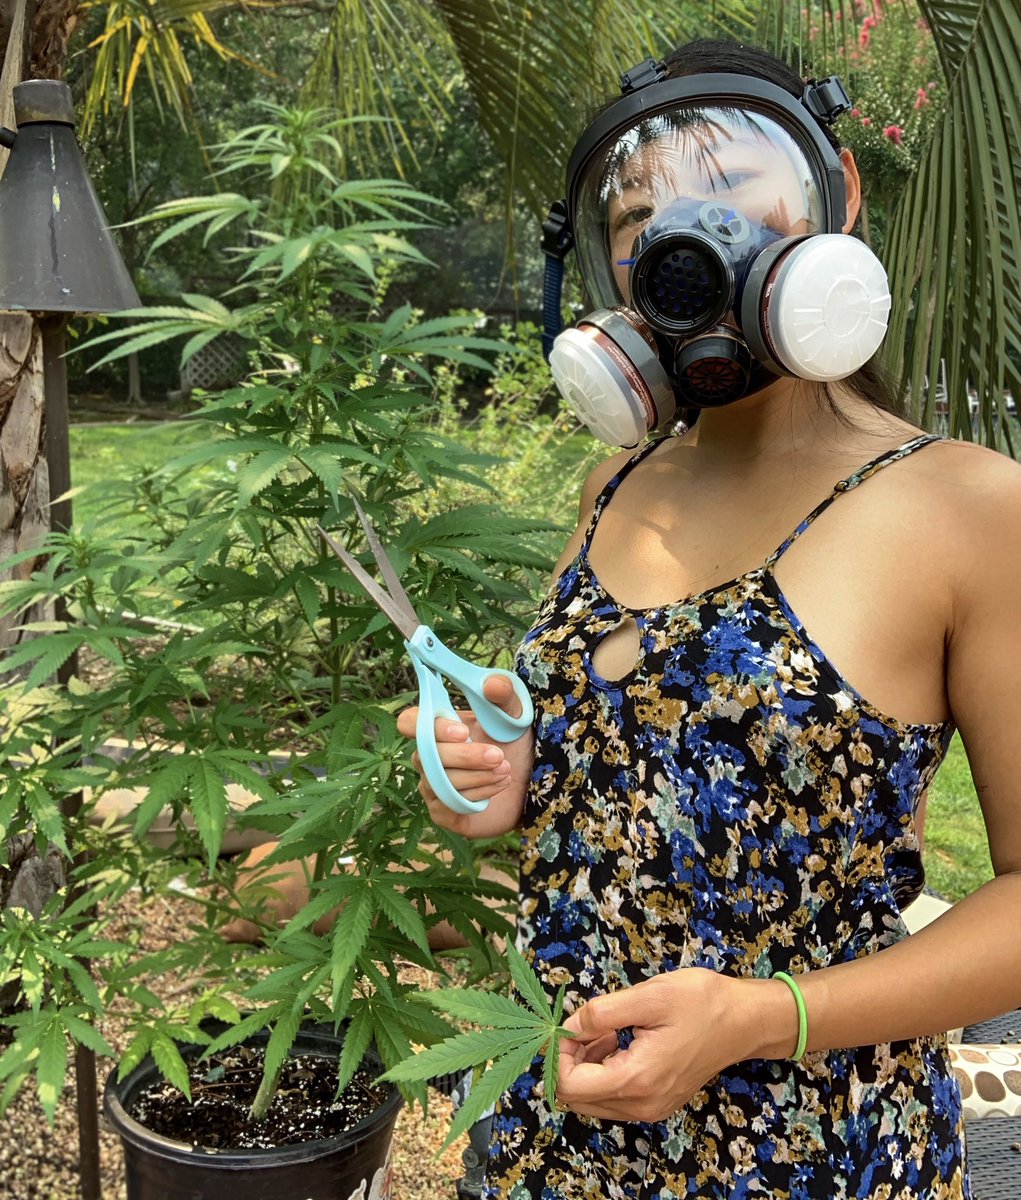 I also started trimming leaves that were yellowing to redirect plant growth to the healthy leaves & buds but other than that didn’t do much to prune it. Gas mask in the second pic is bc we lived pretty close to the big cali fires & the air was bad but u gotta do what u gotta do